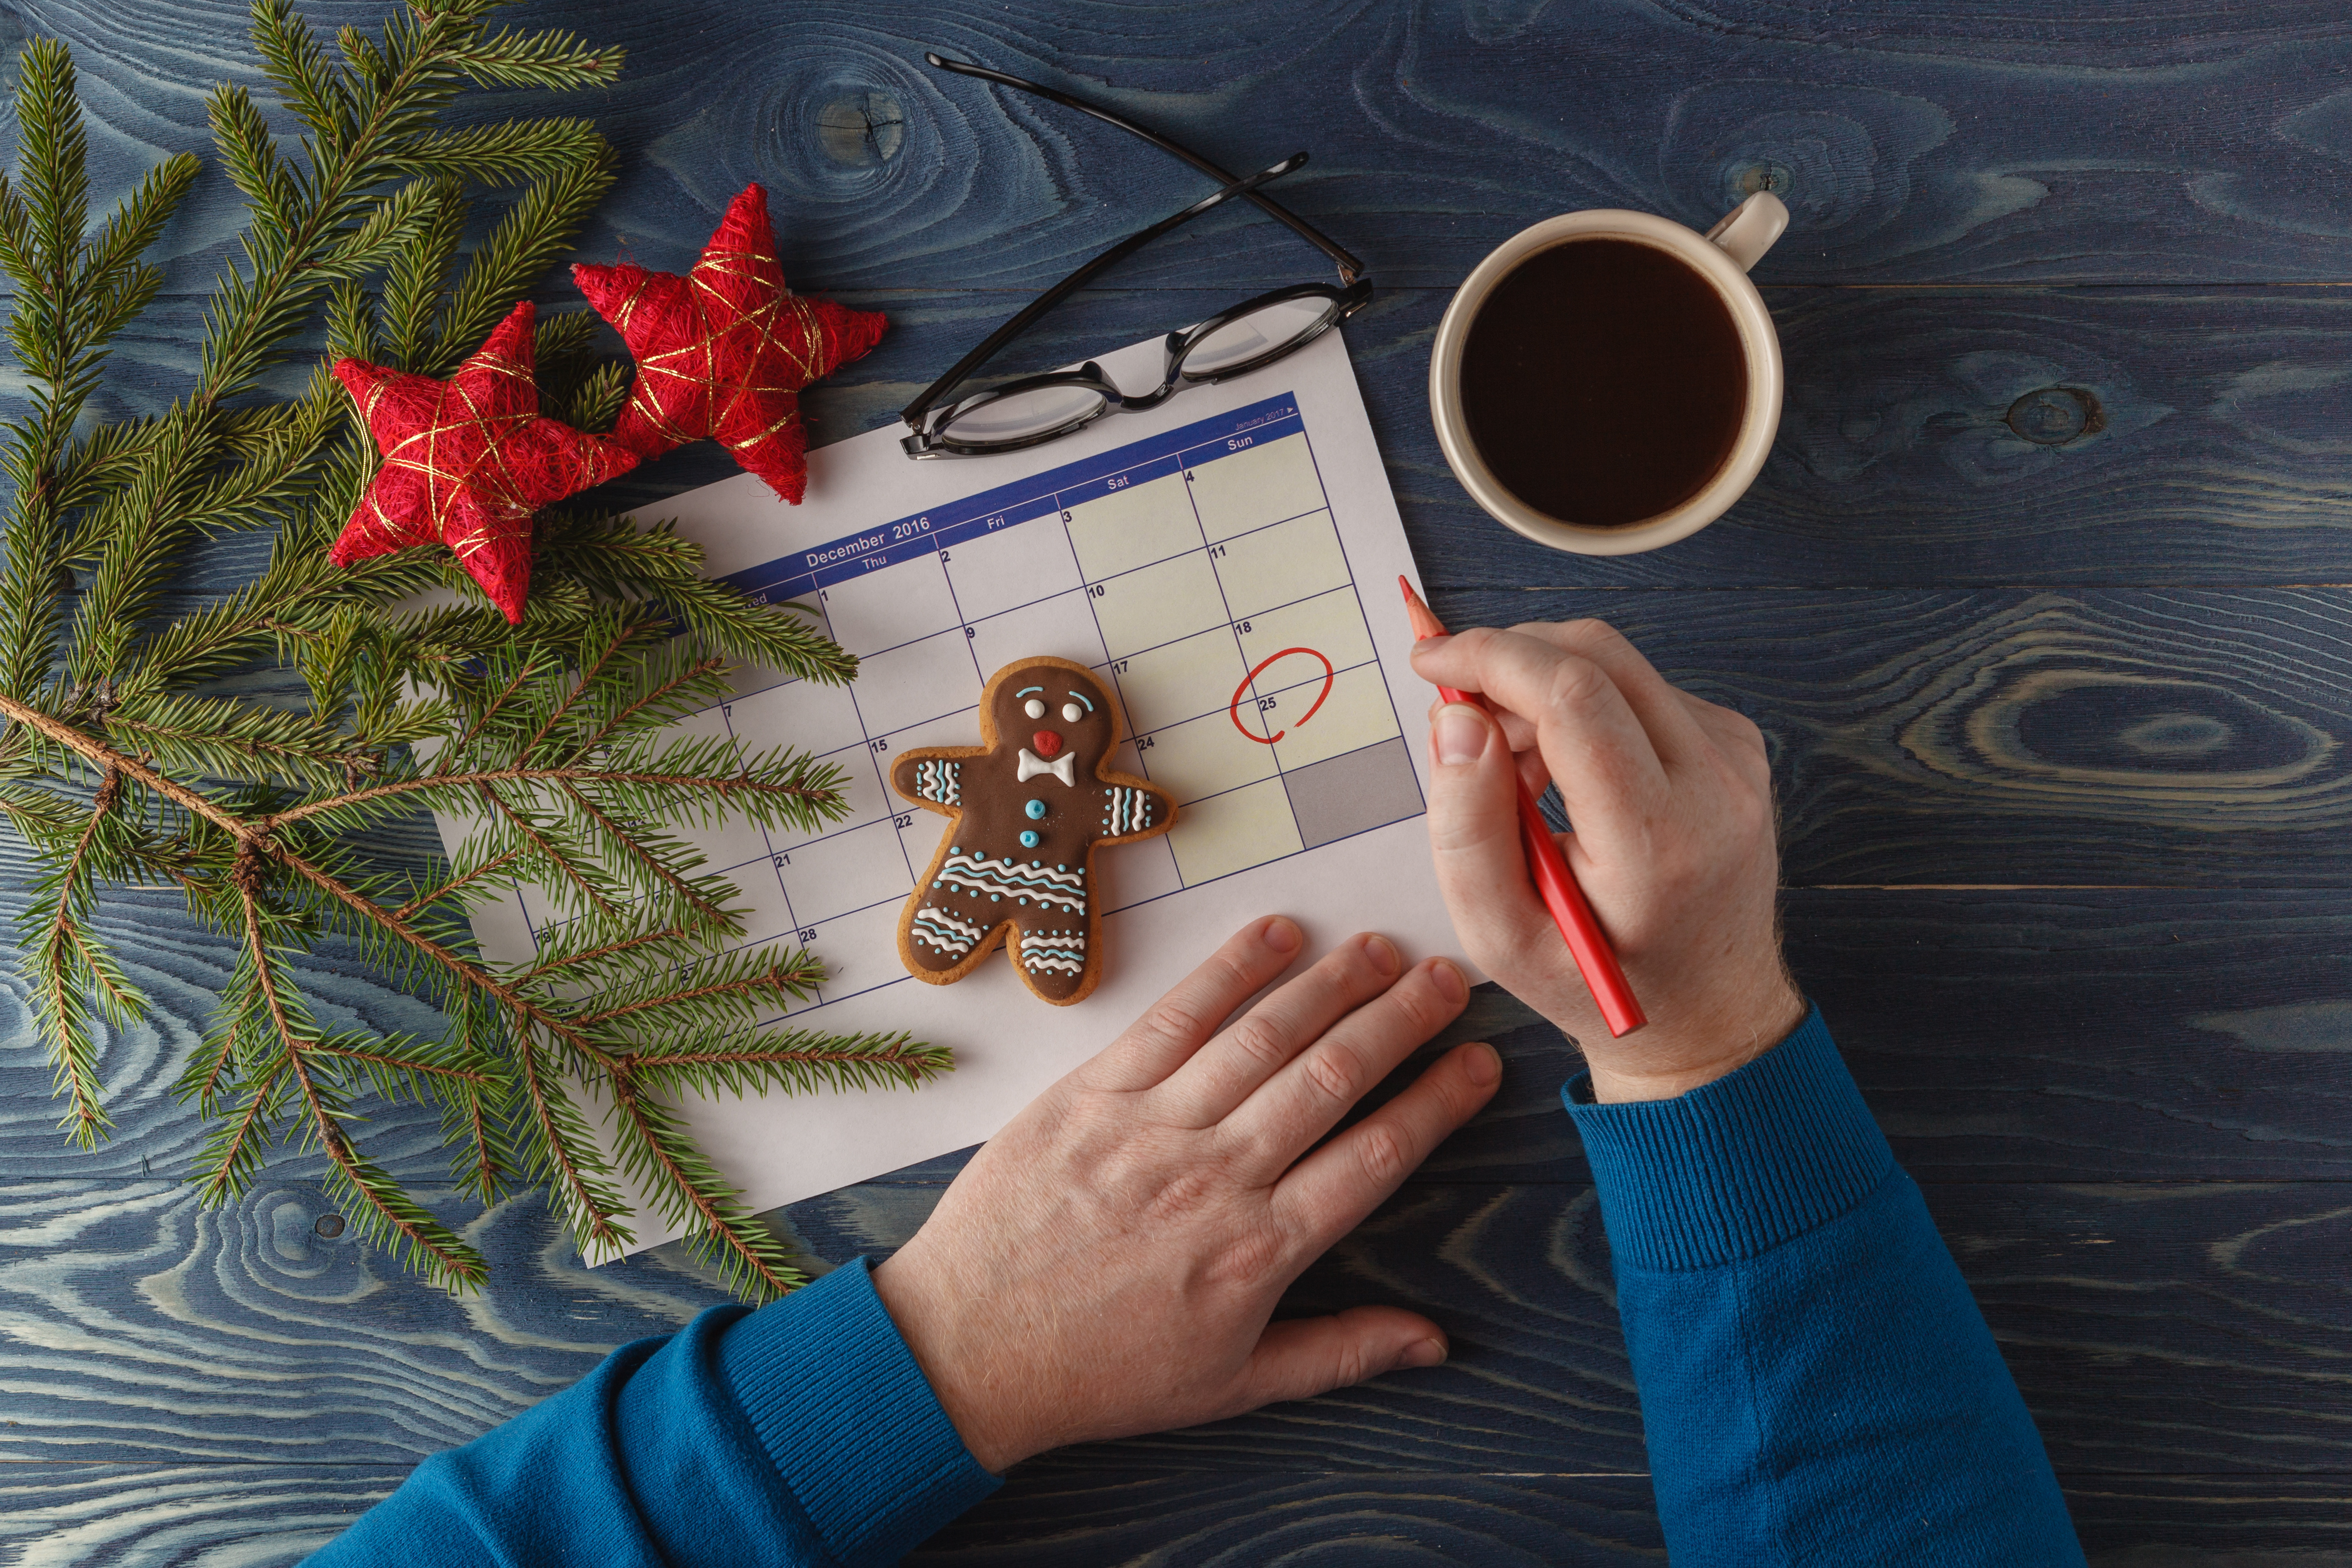  How To Keep Your Team Productive During The Holidays